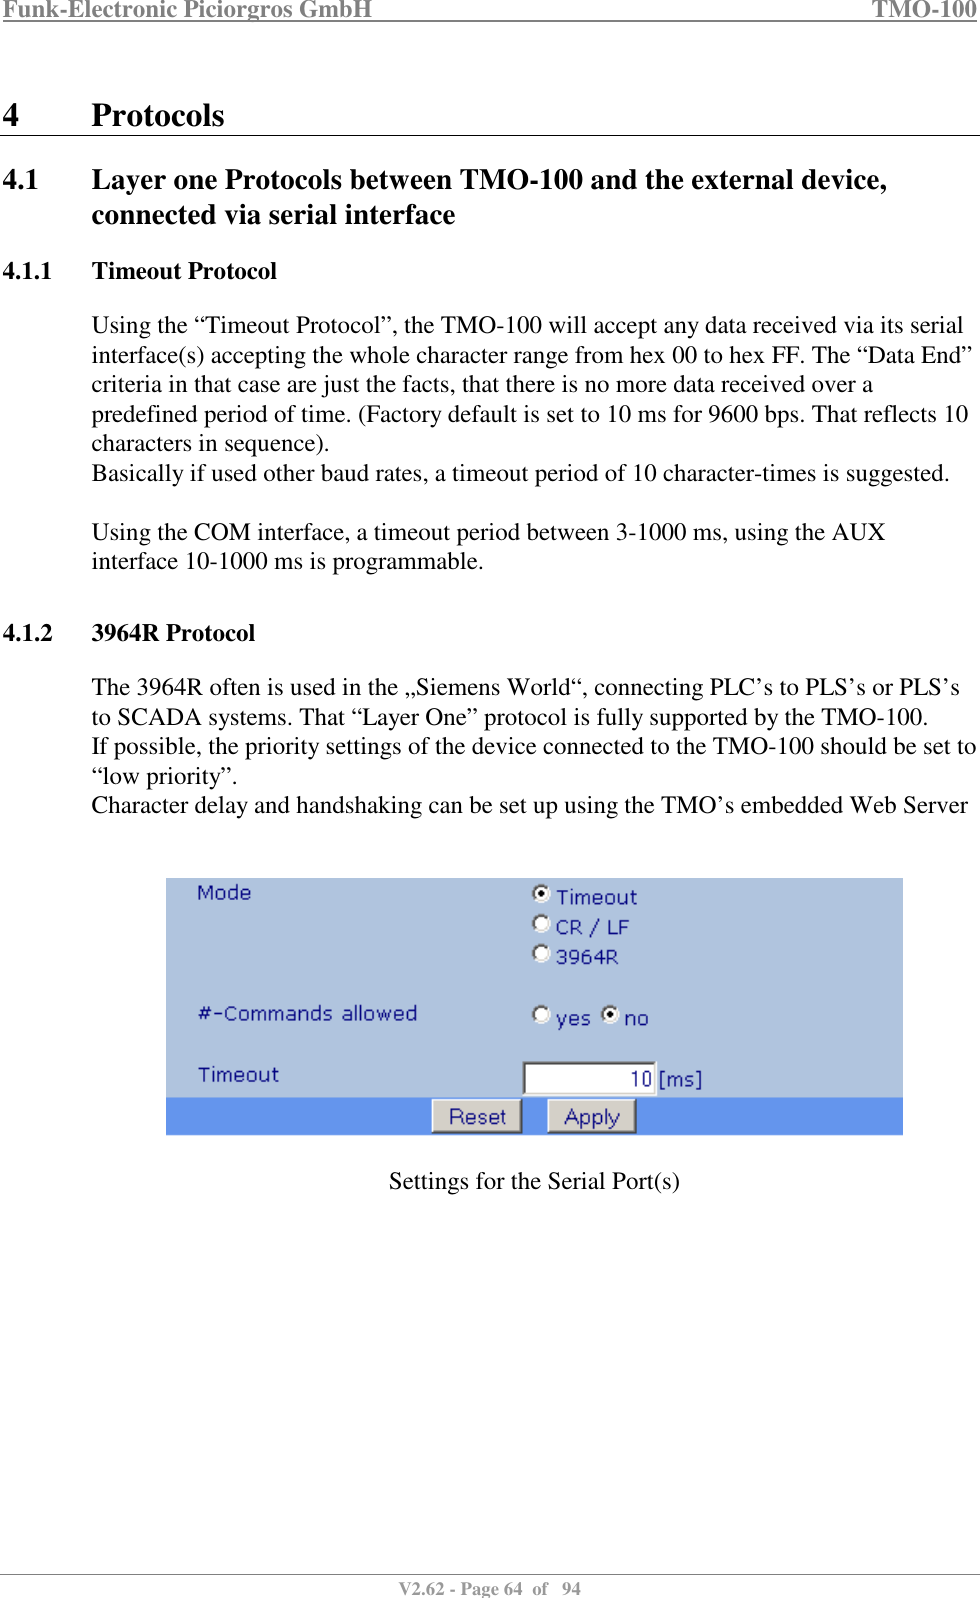 Funk-Electronic Piciorgros GmbH   TMO-100   V2.62 - Page 64  of   94   4 Protocols 4.1 Layer one Protocols between TMO-100 and the external device, connected via serial interface 4.1.1 Timeout Protocol Using the “Timeout Protocol”, the TMO-100 will accept any data received via its serial interface(s) accepting the whole character range from hex 00 to hex FF. The “Data End” criteria in that case are just the facts, that there is no more data received over a predefined period of time. (Factory default is set to 10 ms for 9600 bps. That reflects 10 characters in sequence).  Basically if used other baud rates, a timeout period of 10 character-times is suggested.  Using the COM interface, a timeout period between 3-1000 ms, using the AUX interface 10-1000 ms is programmable.    4.1.2 3964R Protocol The 3964R often is used in the „Siemens World“, connecting PLC’s to PLS’s or PLS’s to SCADA systems. That “Layer One” protocol is fully supported by the TMO-100.  If possible, the priority settings of the device connected to the TMO-100 should be set to “low priority”. Character delay and handshaking can be set up using the TMO’s embedded Web Server     Settings for the Serial Port(s)  